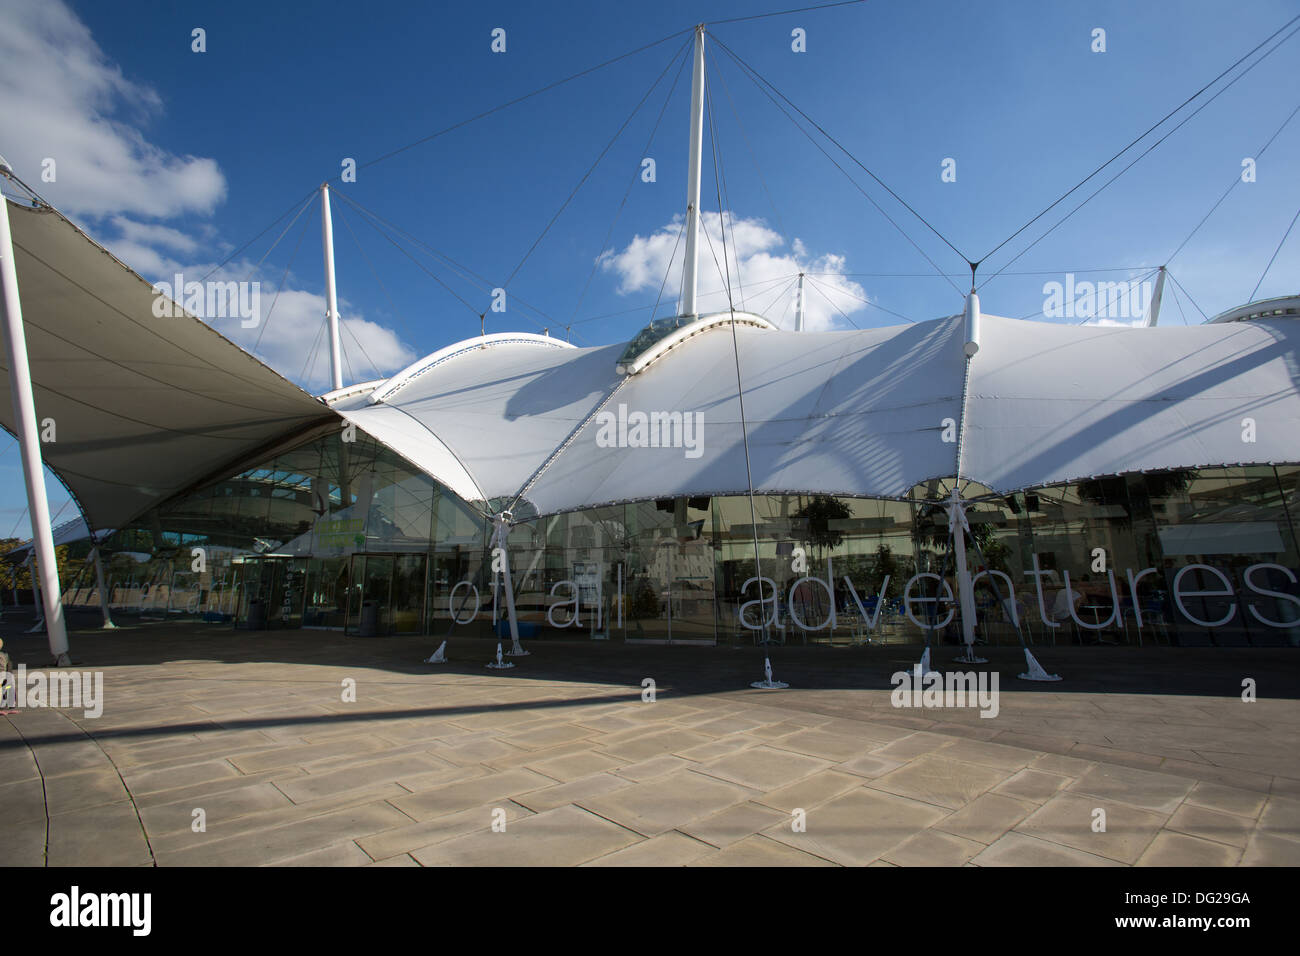 City of Edinburgh, Scotland. Entrance to the Our Dynamic Earth Science Centre and conference venue at Holyrood. Stock Photo